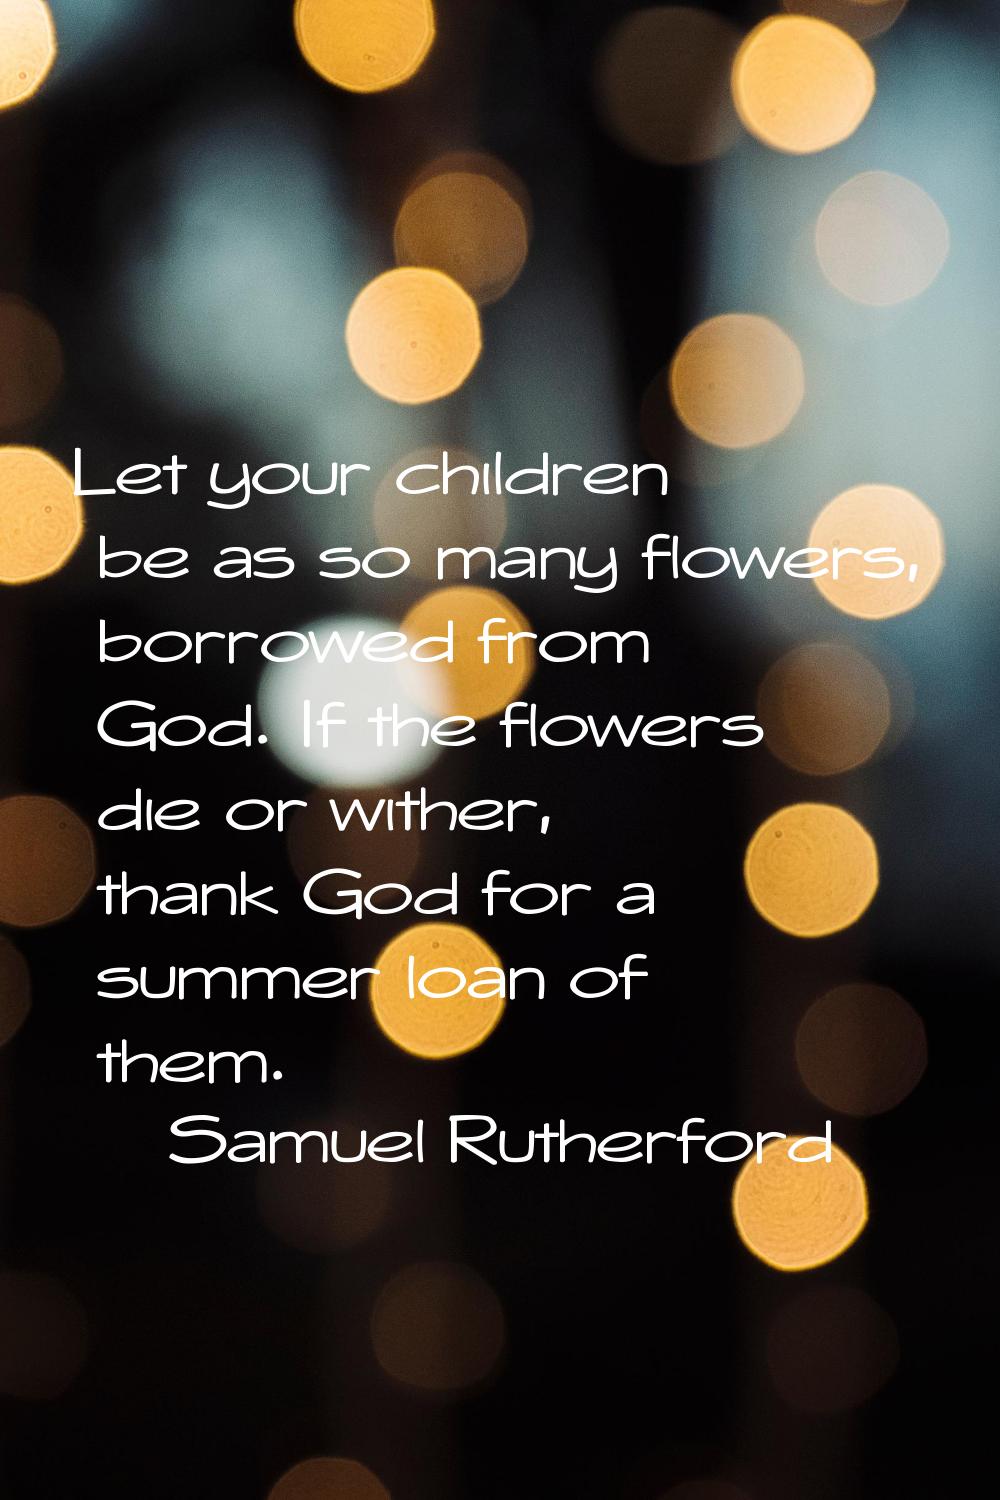 Let your children be as so many flowers, borrowed from God. If the flowers die or wither, thank God